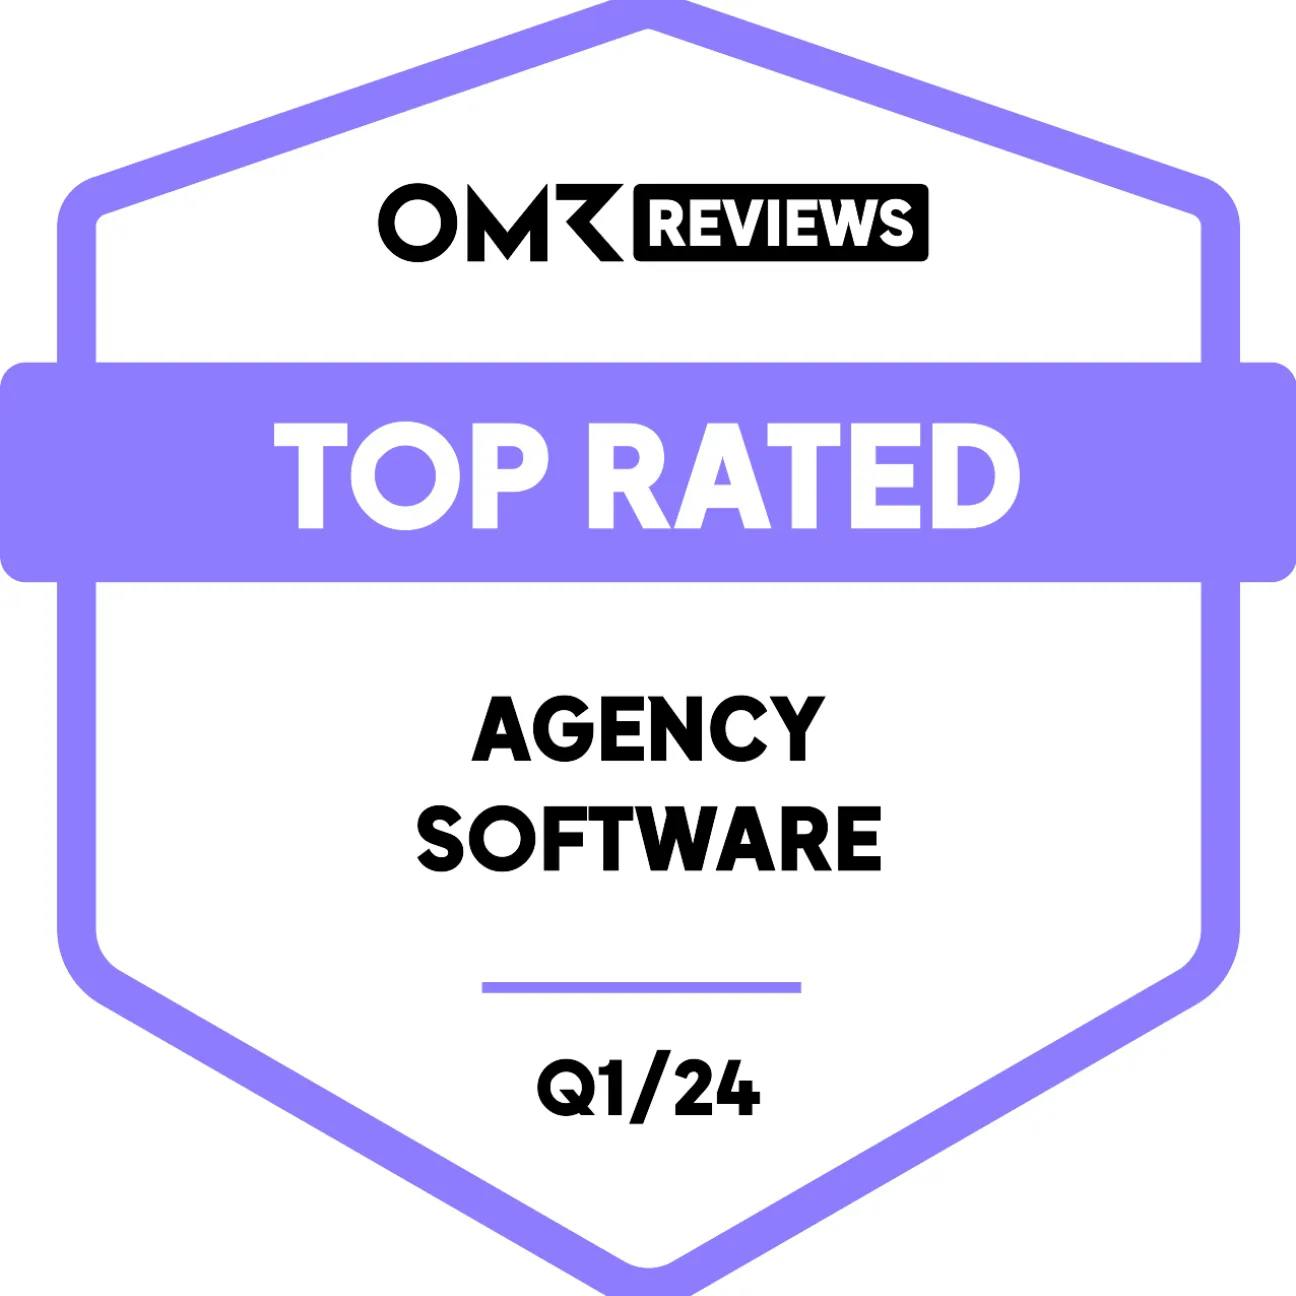 helloHQ | OMR Reviews Badge Agency Software Top Rated Q1 24 TBX